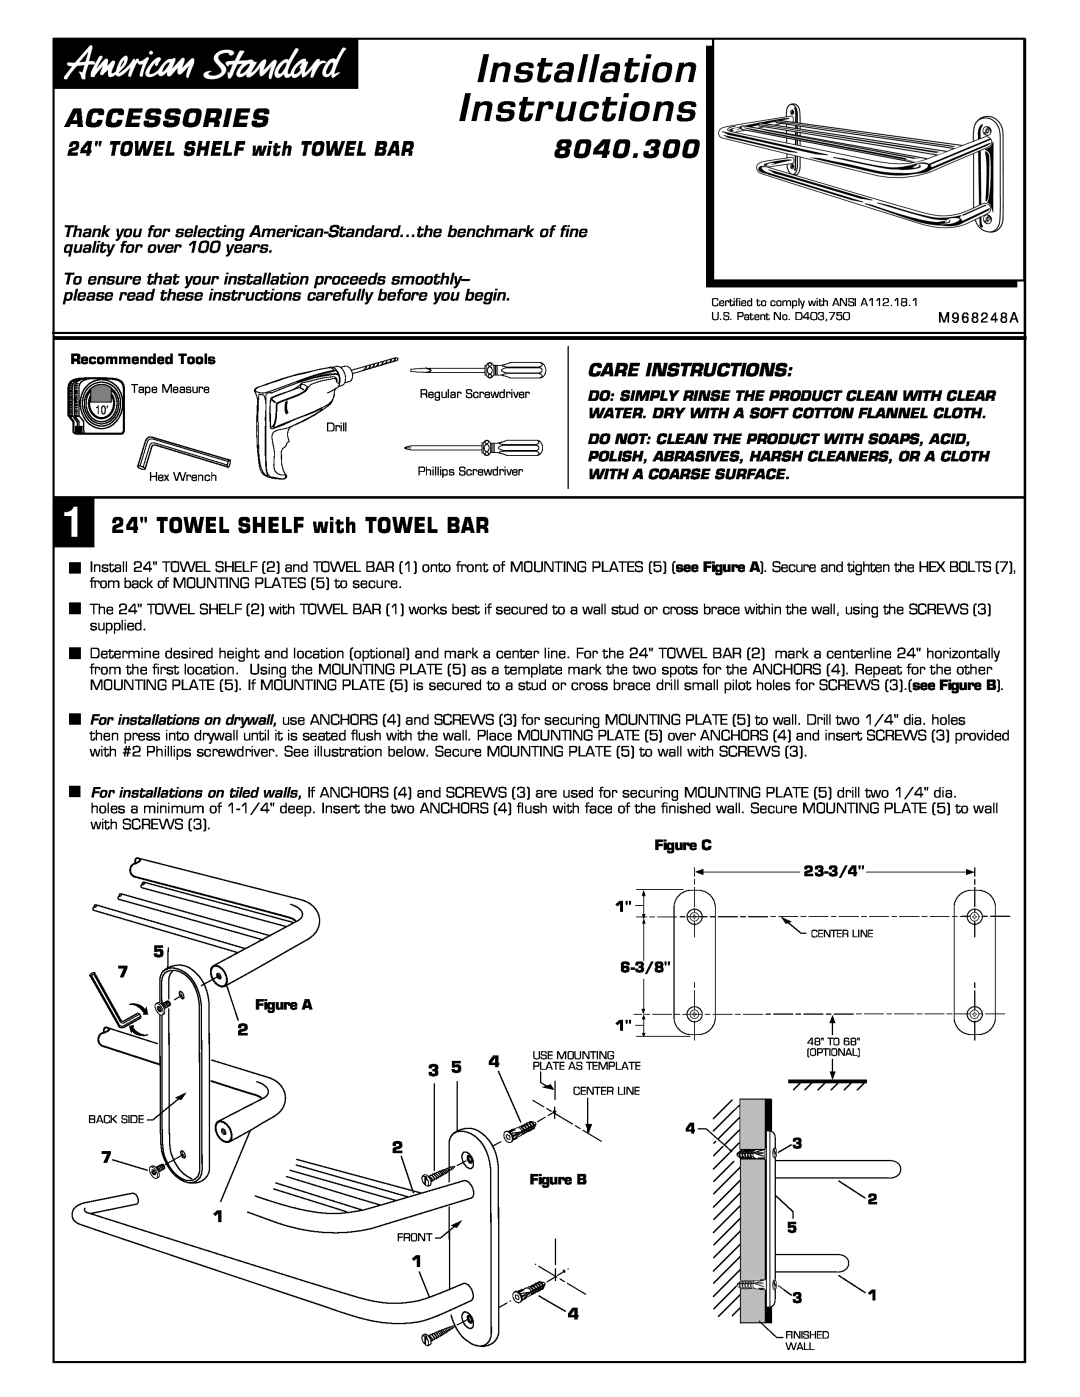 American Standard 8040.300 installation instructions Accessories, TOWEL SHELF with TOWEL BAR, Care Instructions, 6-3/8 